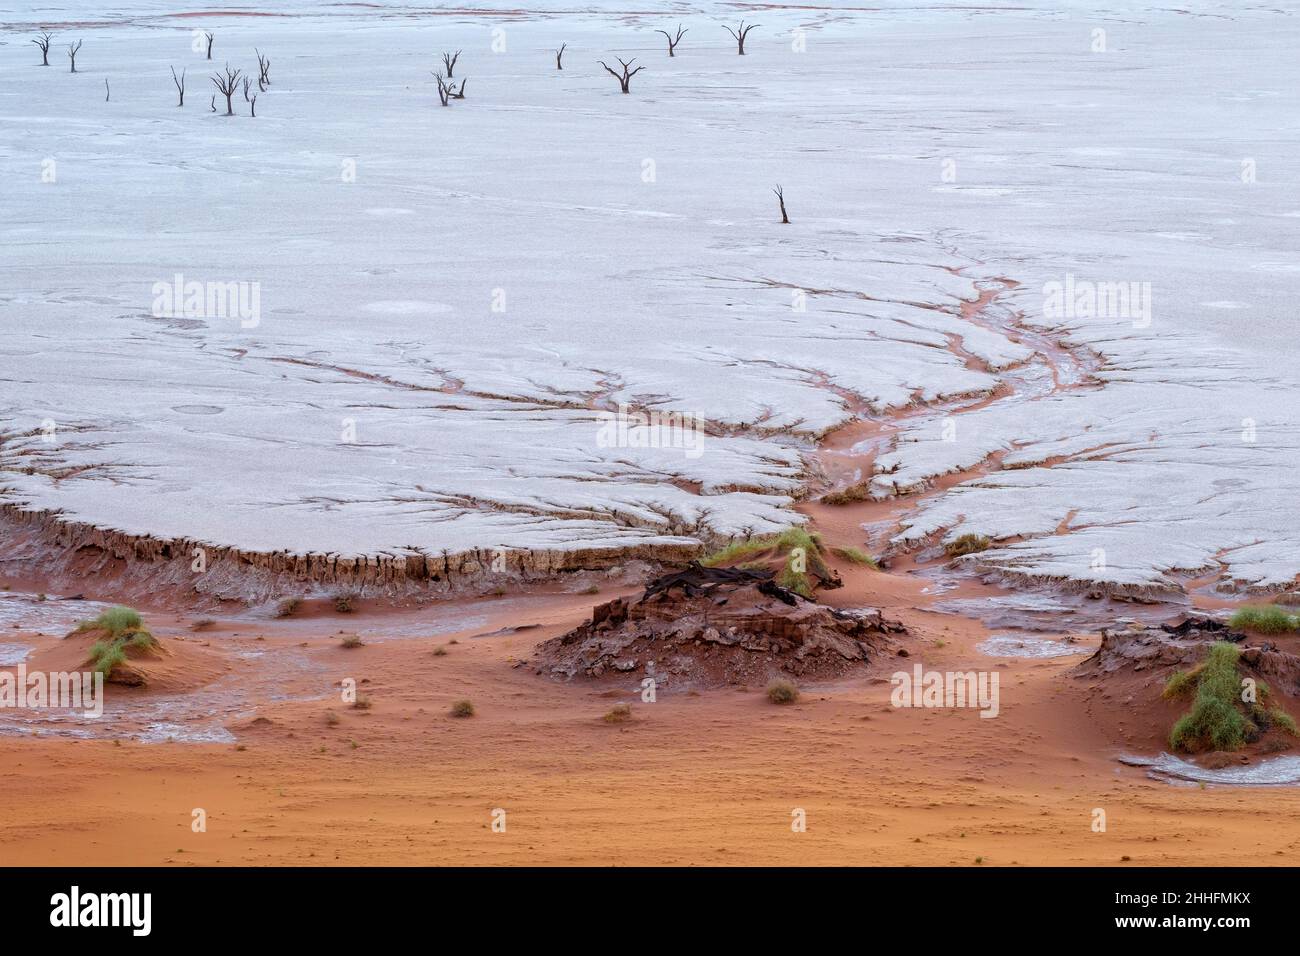 Dendritic water pattern on the Deadvlei clay pan with the trees in distance. Sossuvlei, Namib-Naukluft Park, Namibia Stock Photo